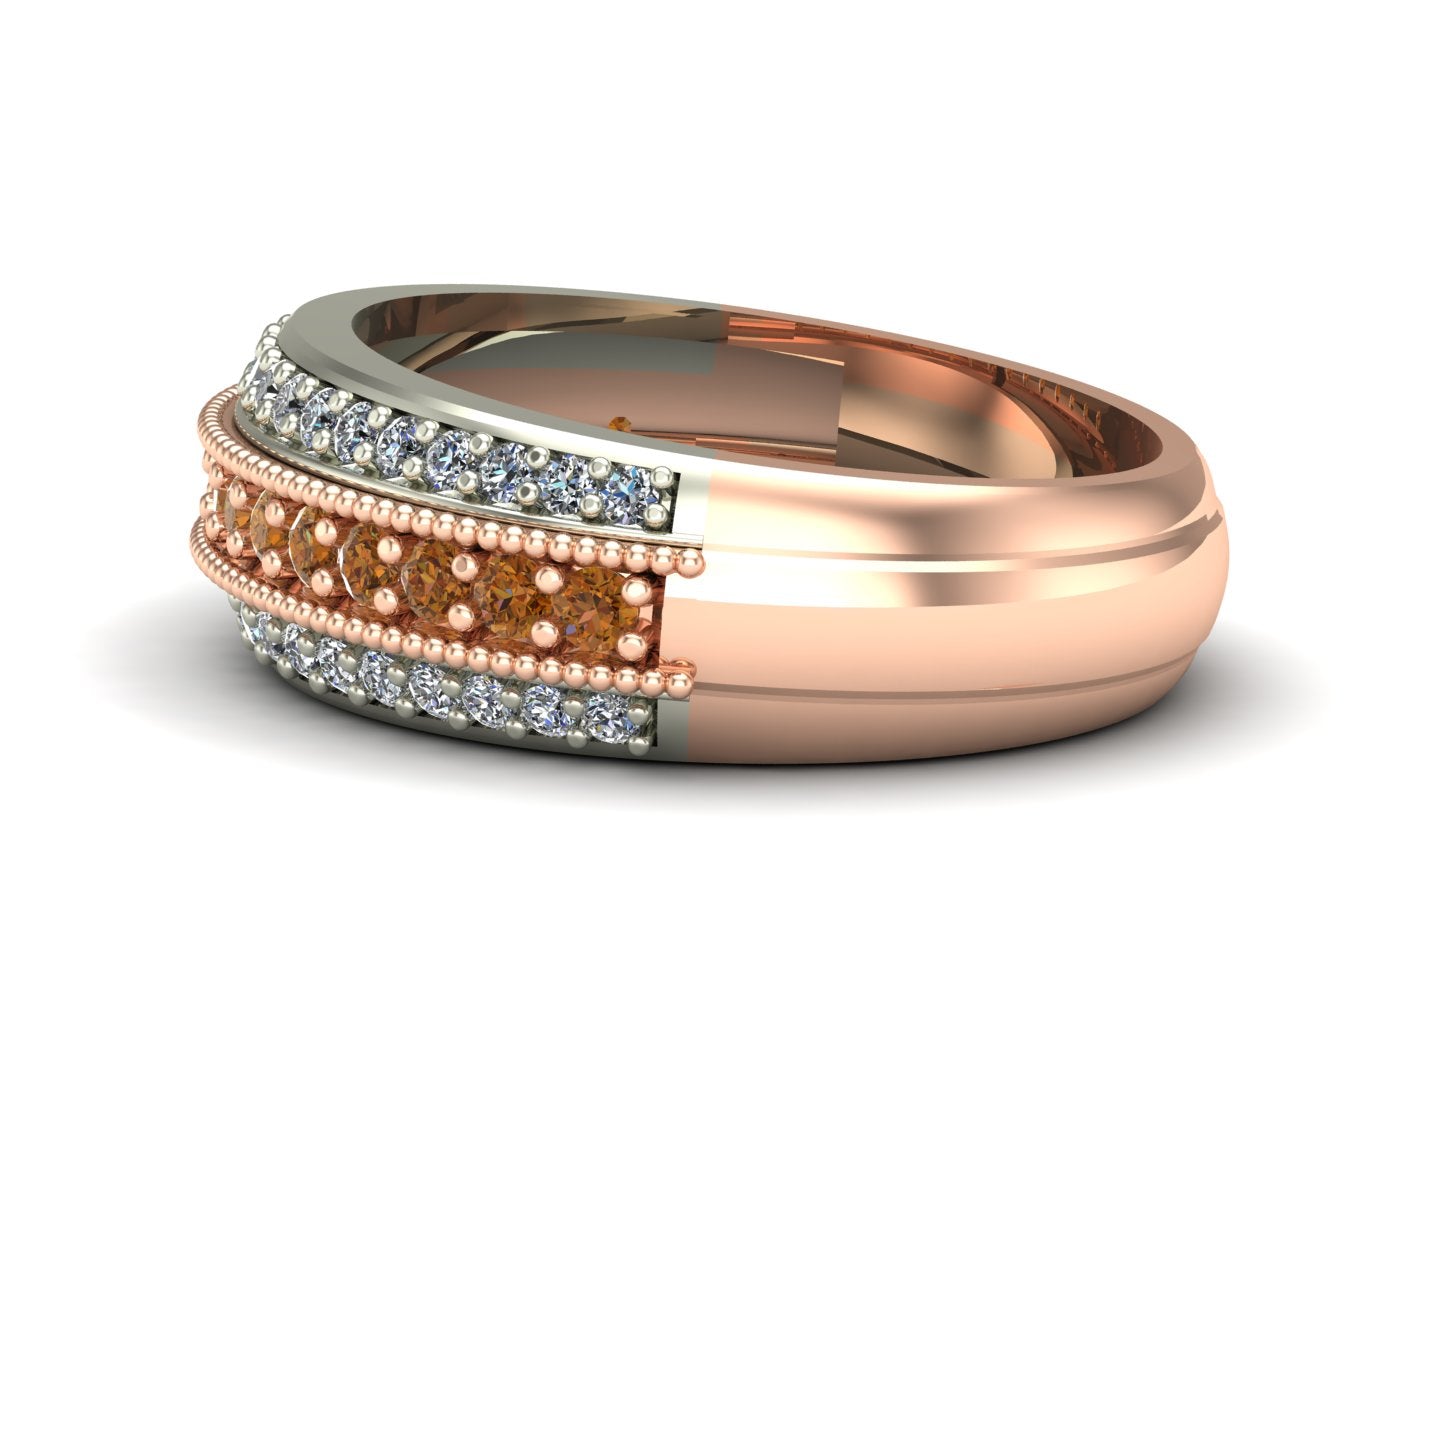 Cognac and white diamond band in 14k rose and white gold - Charles Babb Designs - side view